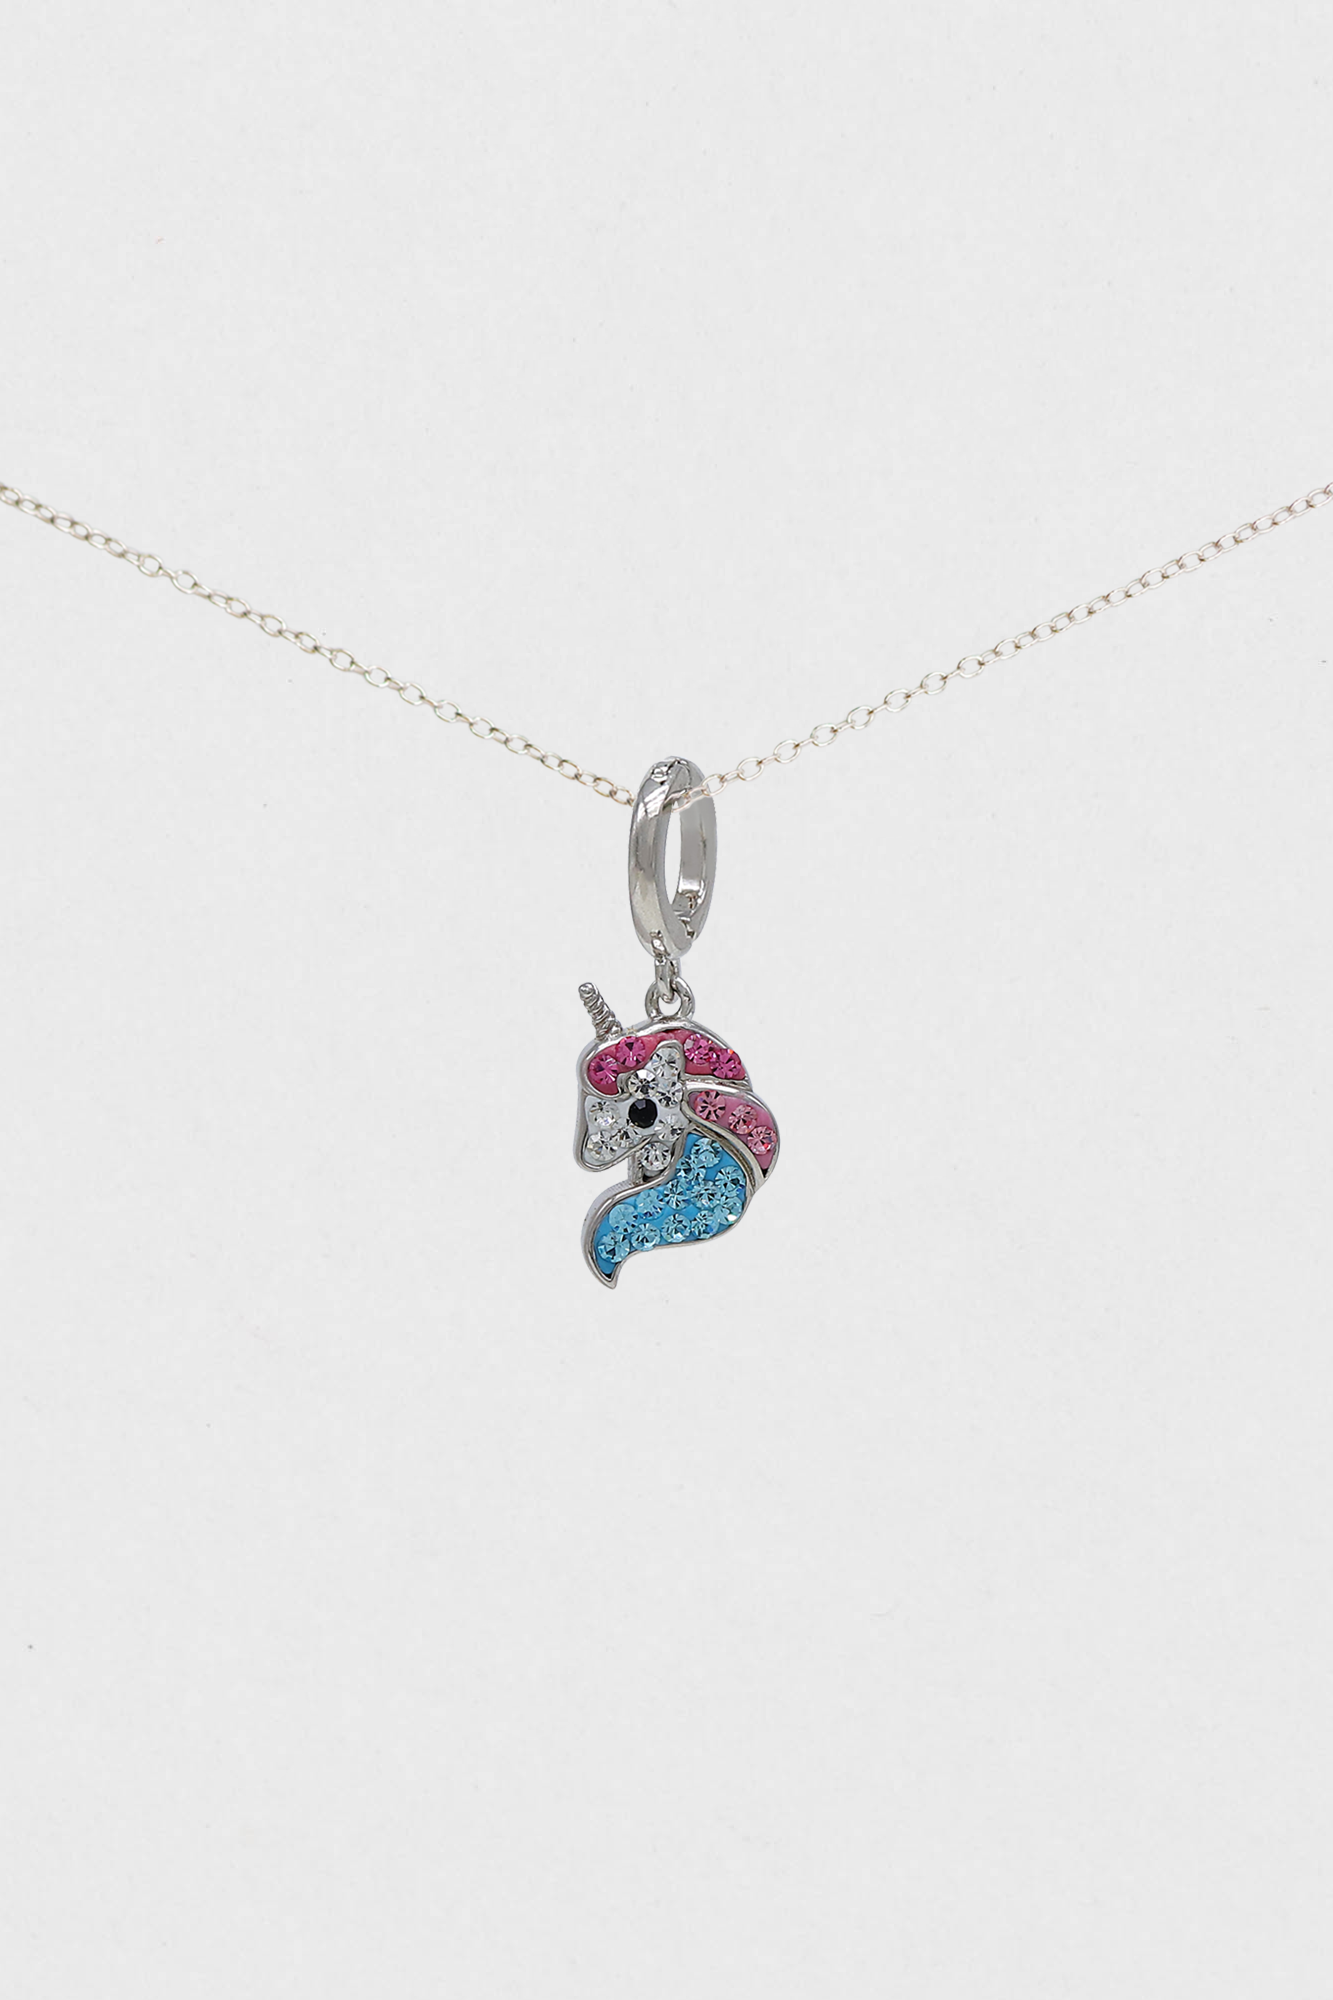 Crystal Unicorn Sterling Silver Charm | Annie and Sisters